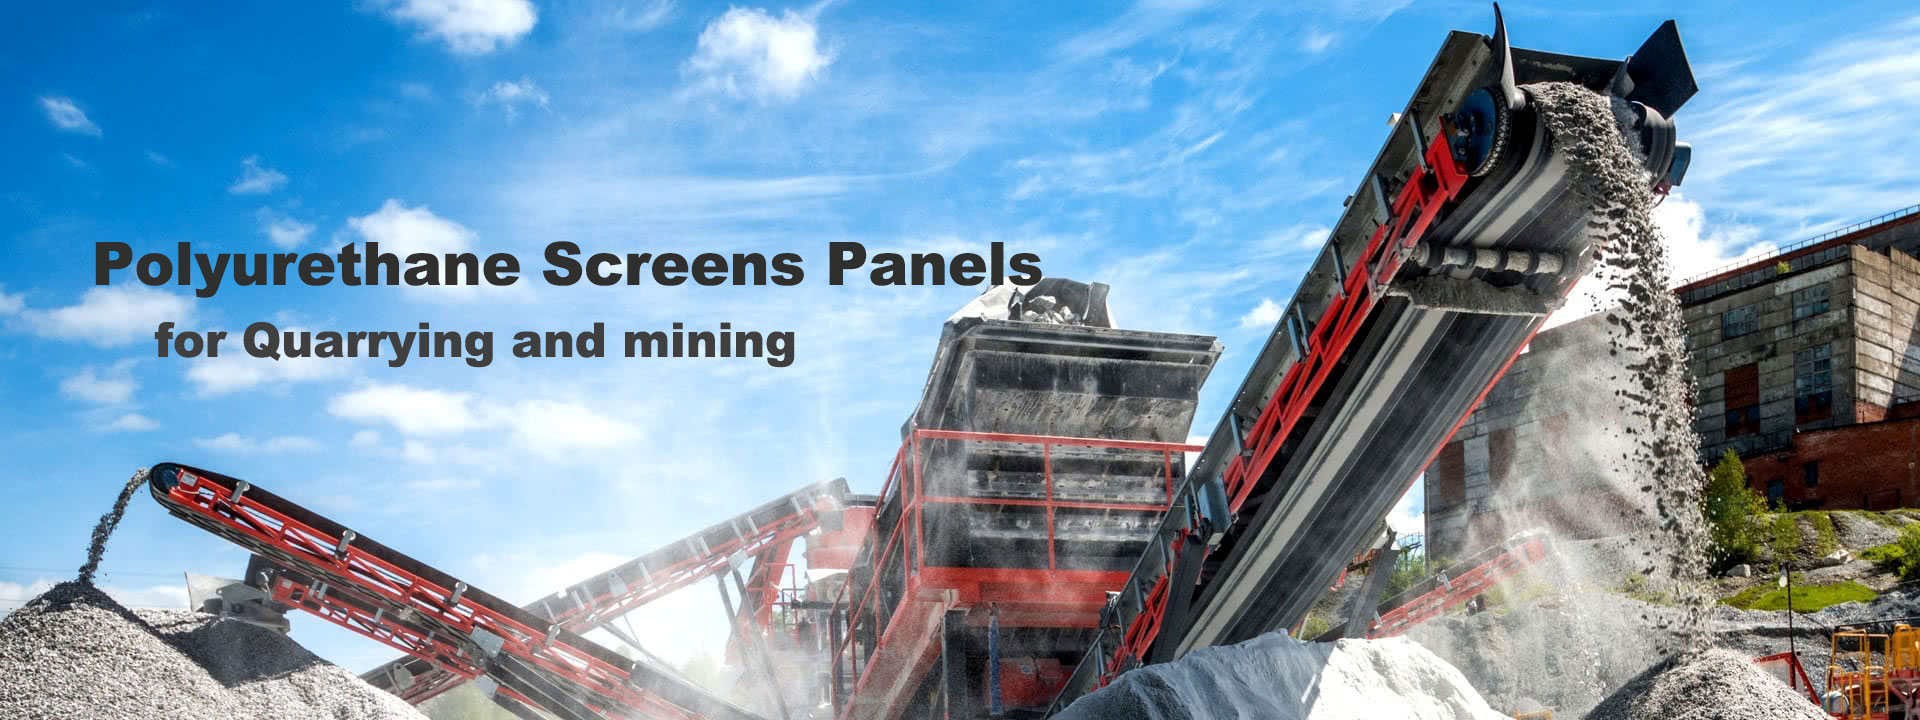 Polyurethane Screen Panels for Quarrying and mining 